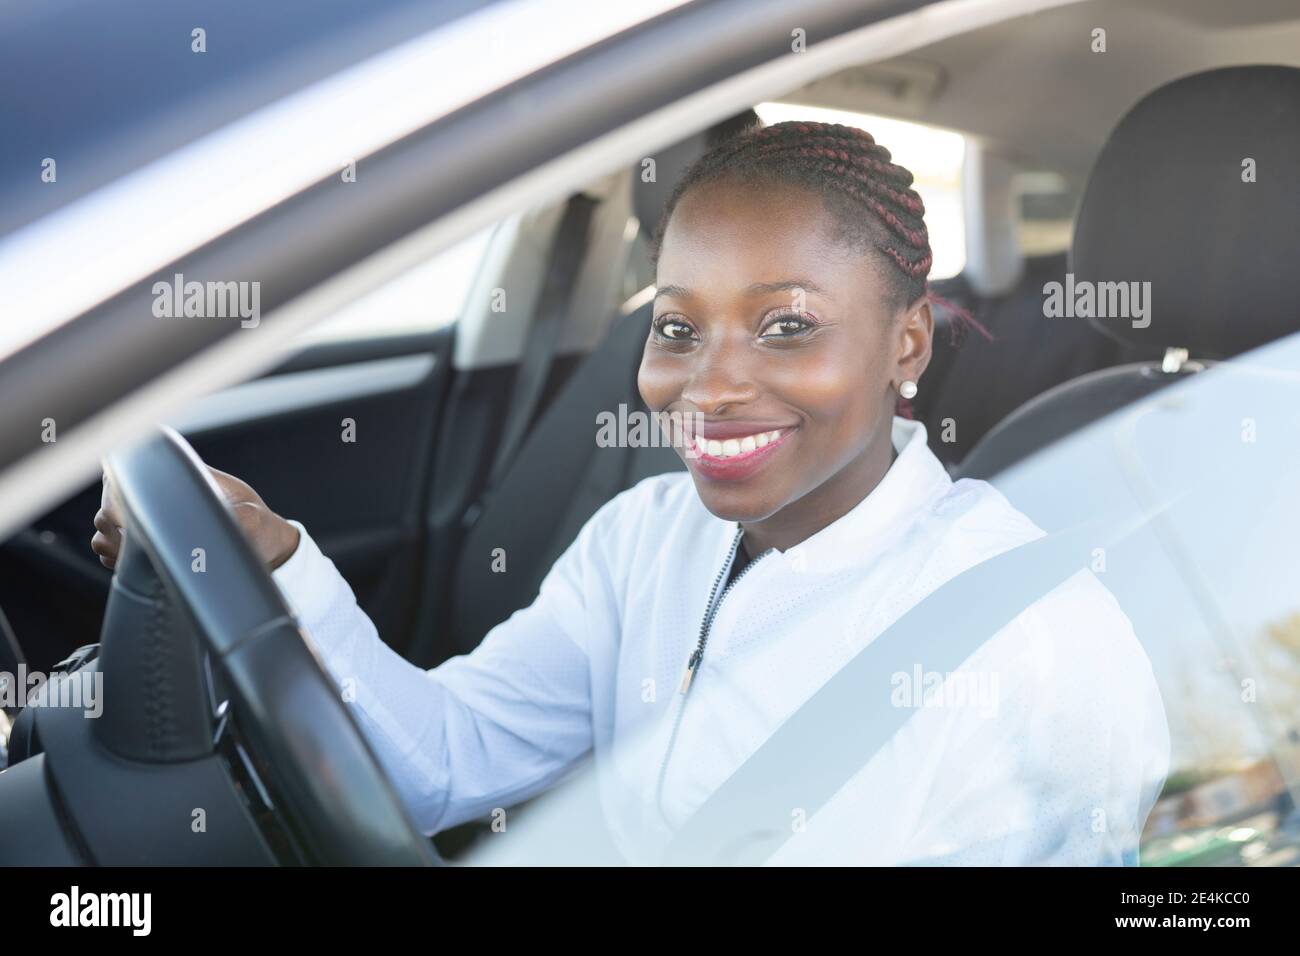 Smiling woman holding steering wheel while sitting in car Stock Photo